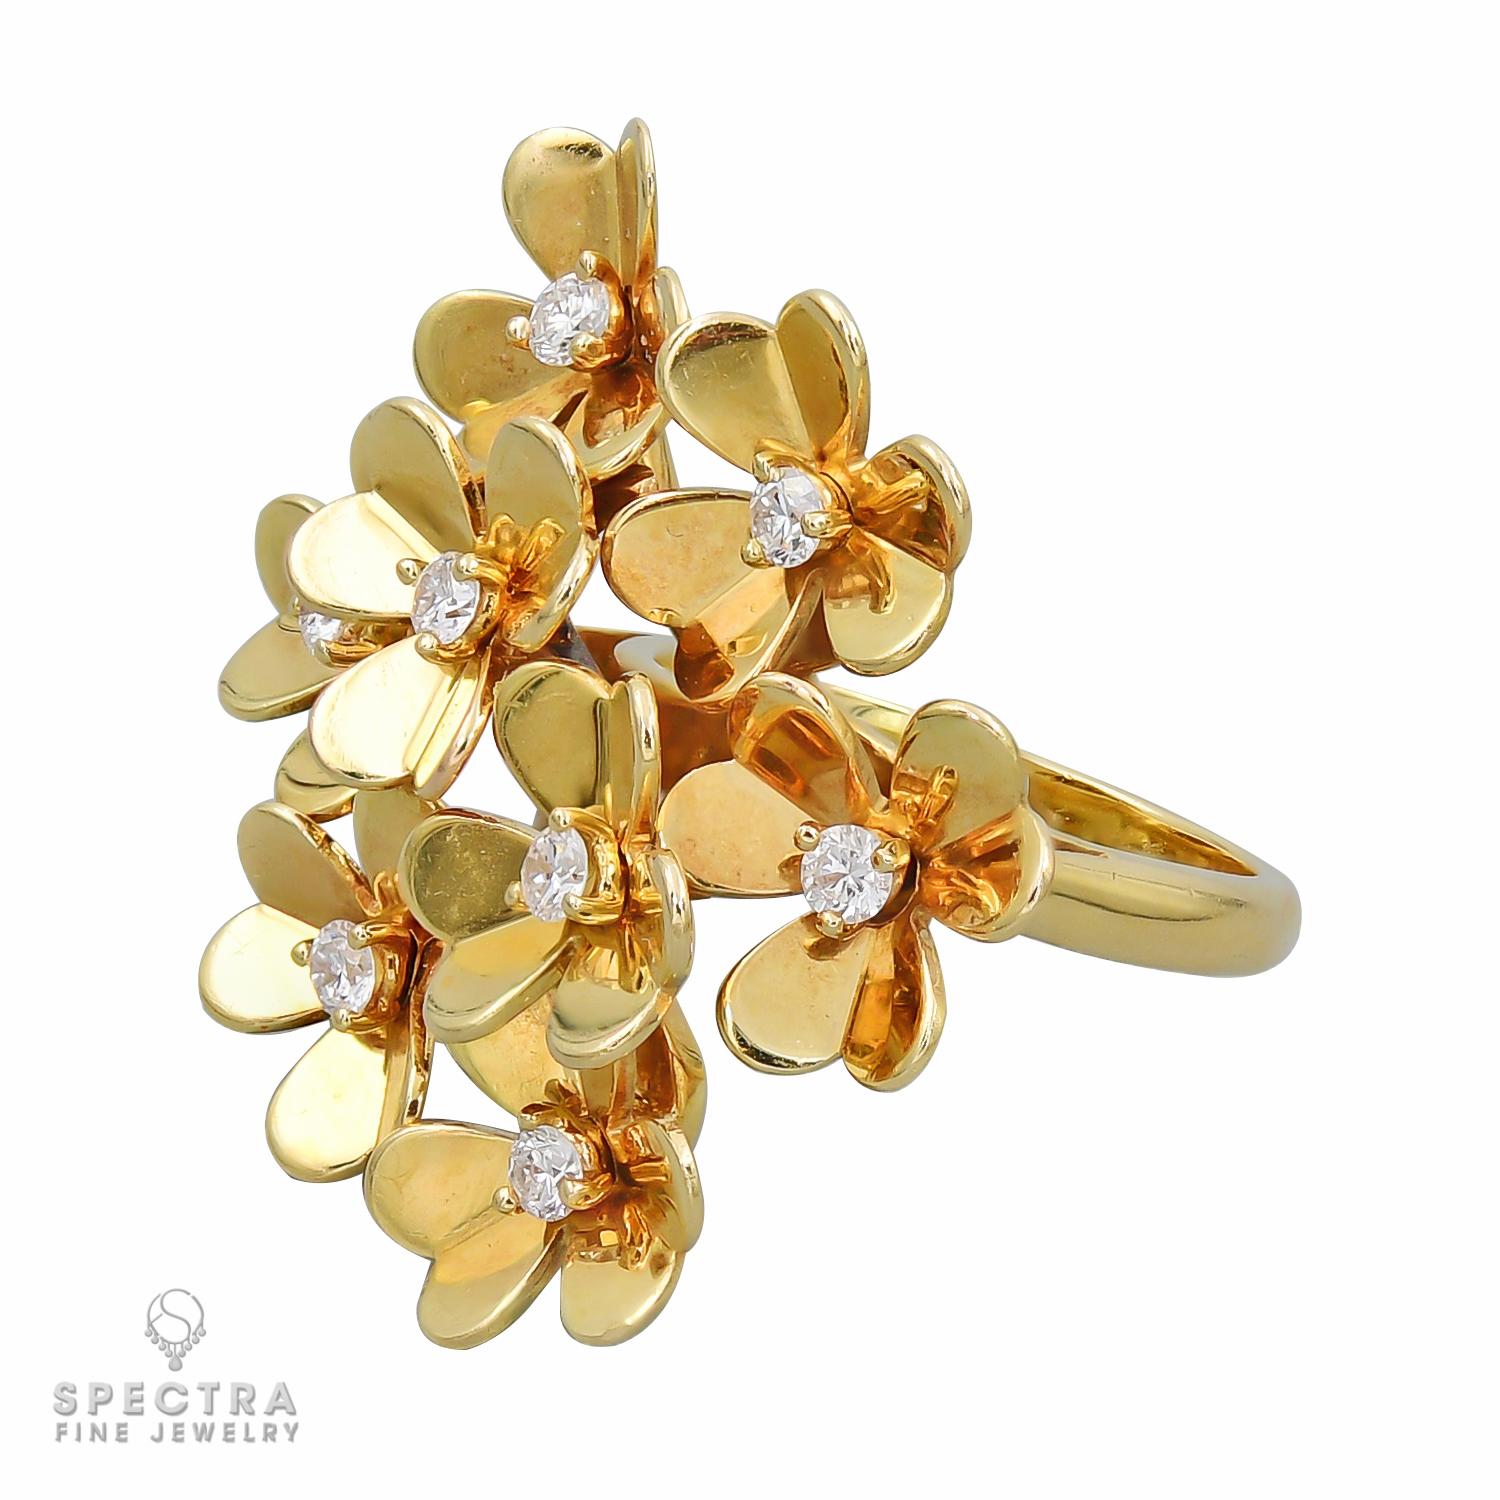 A Frivole ring comprising of 8 flowers, set with round diamonds with DEF color, IF to VVS clarity.
Metal is 18k yellow gold, weight 11.95 gram.
Signed VCA 750, stamped with serial number.
Size 51 (US 5.5)
Retail: $9,900 before tax.
Price shown does